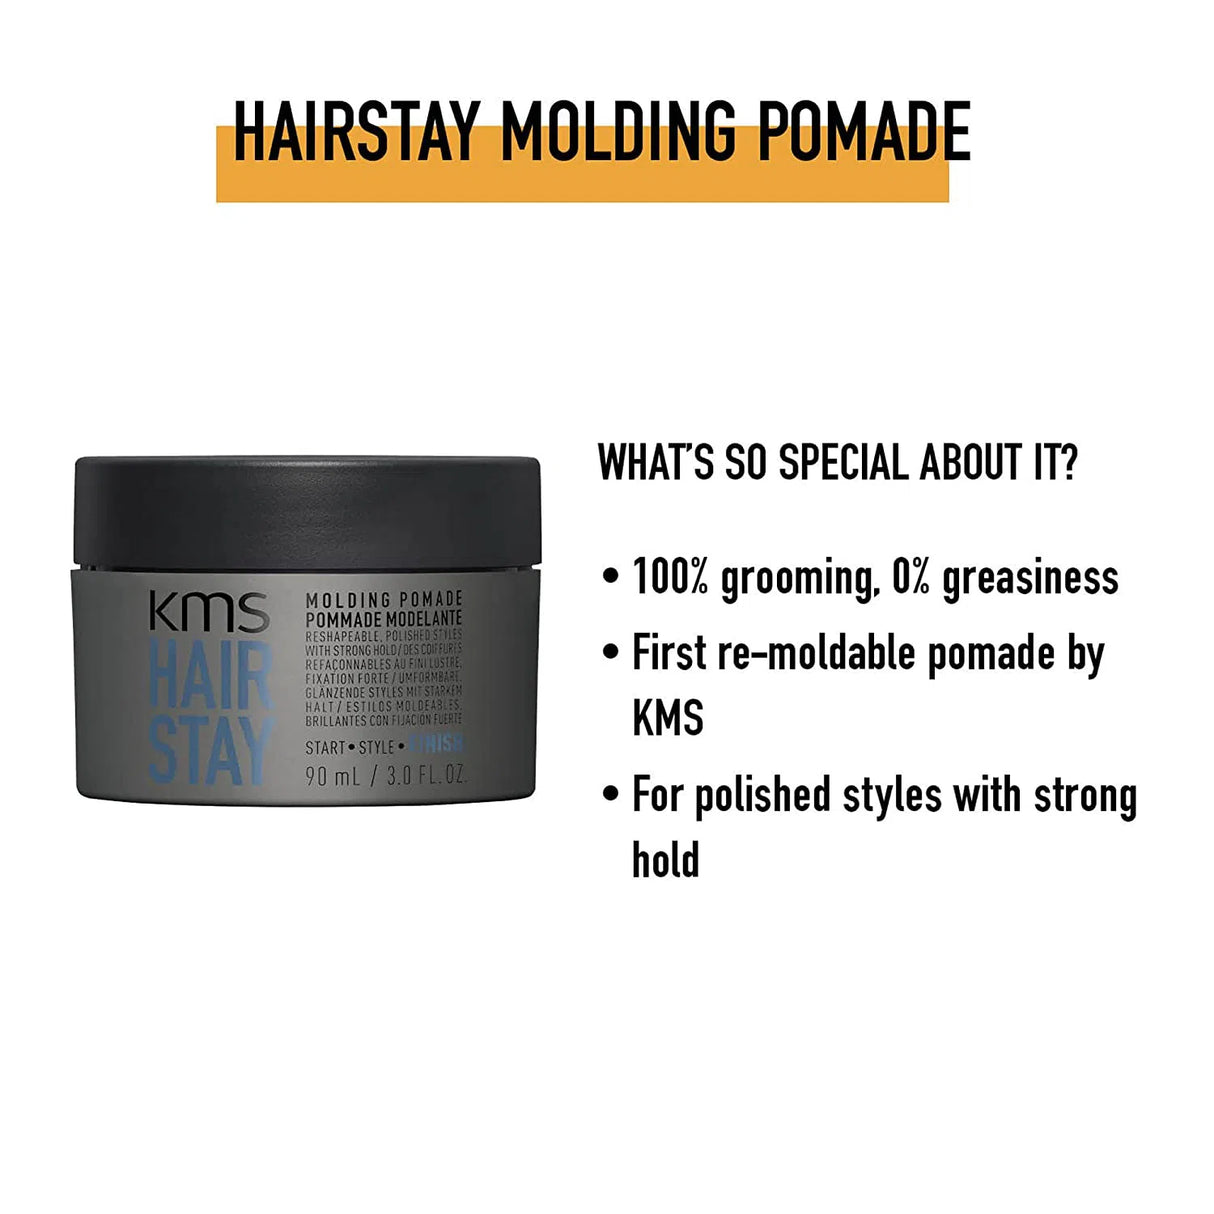 Hairstay Molding Pomade